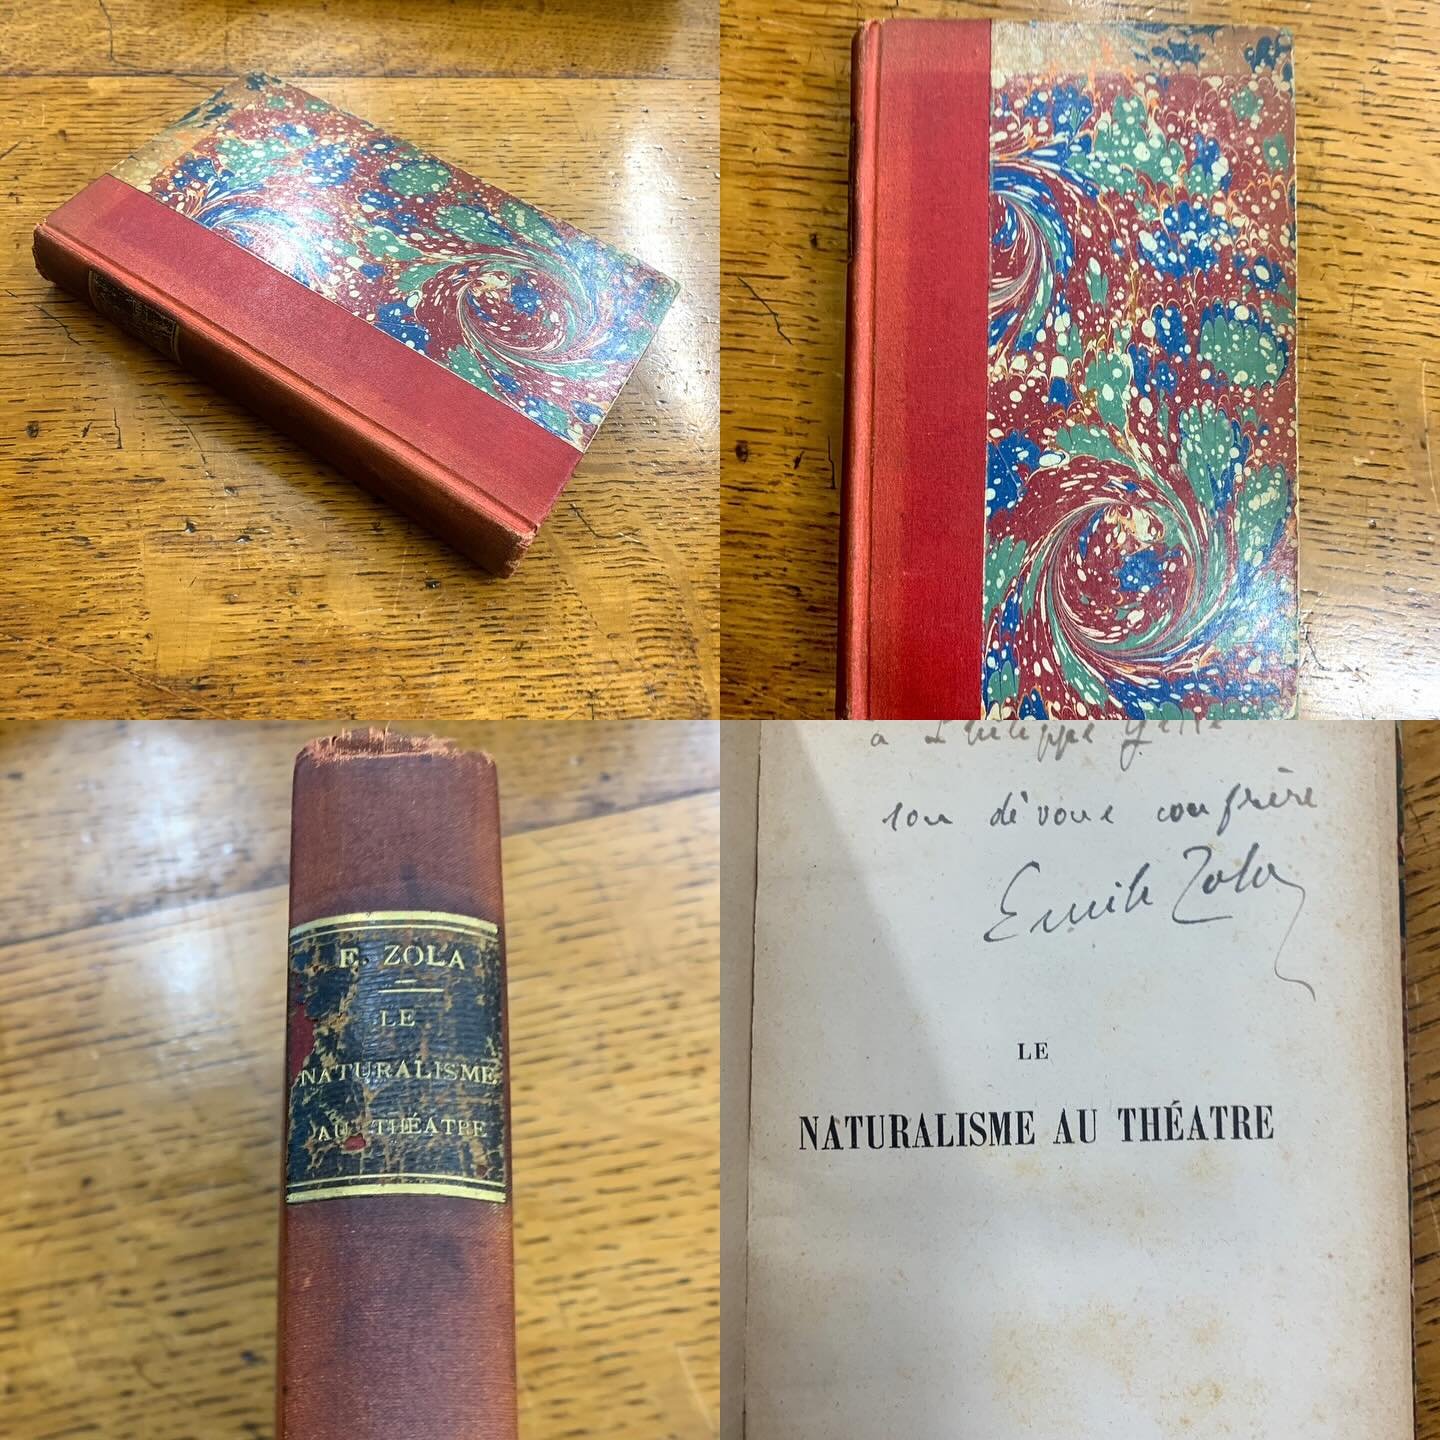 Signed first edition of Naturalisme au Theatre by Emile Zola. Available from today in the shop. 
#emilezola
#jaccuse 
#zola
#theatre
#antiquarianbooks 
#firstedition 
#signedfirsteditions 
#frenchliterature 
#novel
#rarebooks
#greatauthors 
#writers
